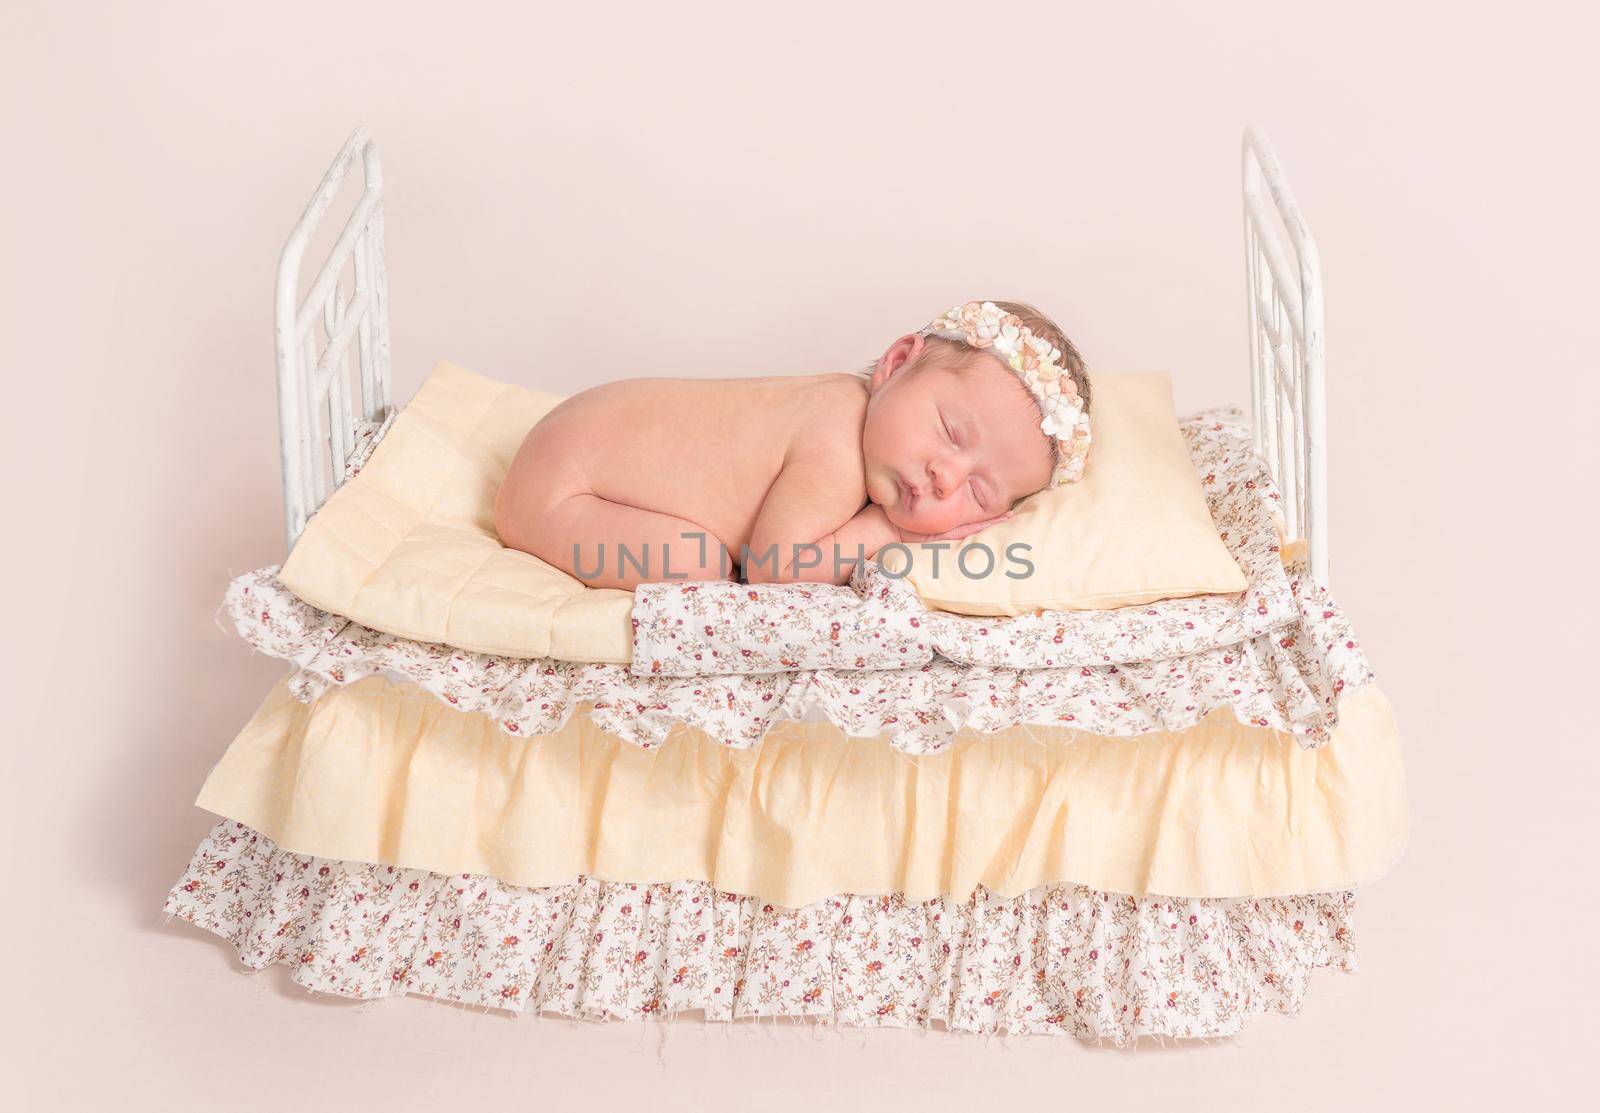 infant sleeping on adult like bed with yellow sheets and covers, on top of it